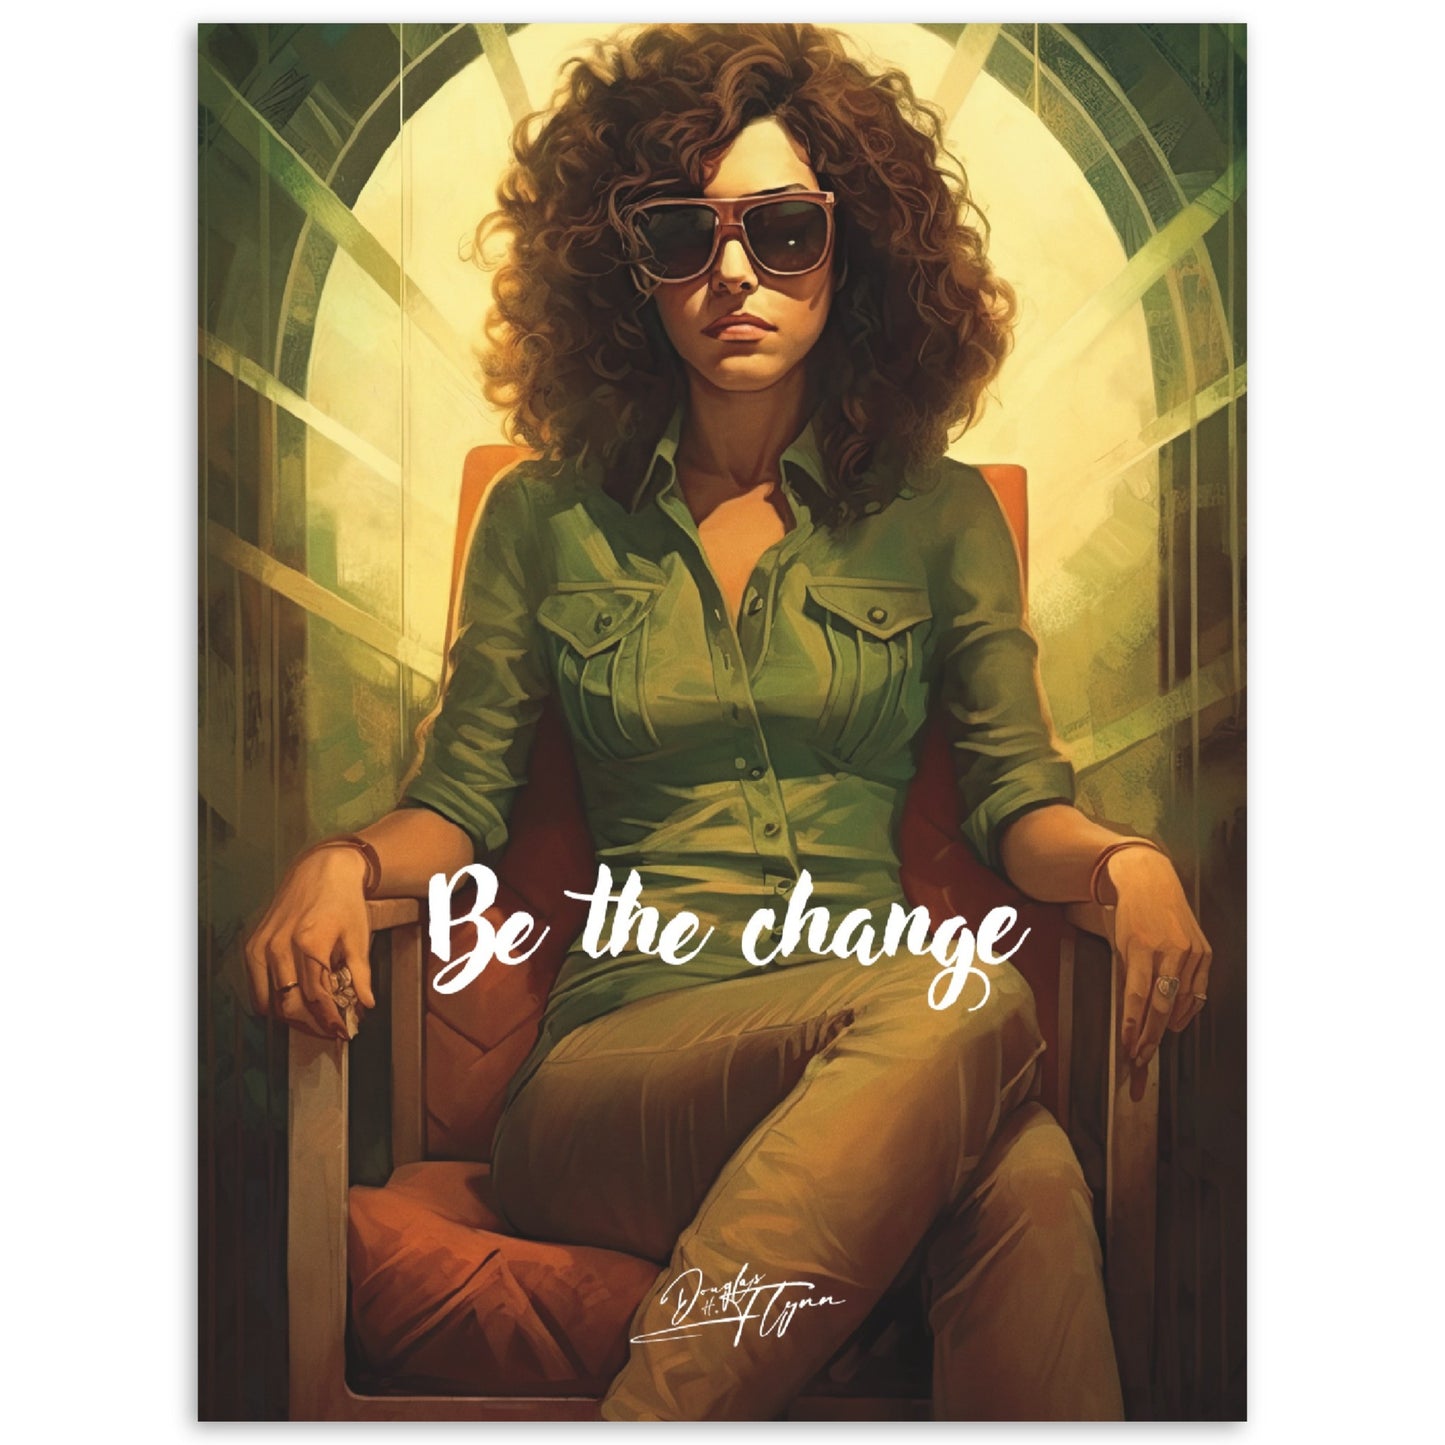 »Be the change«